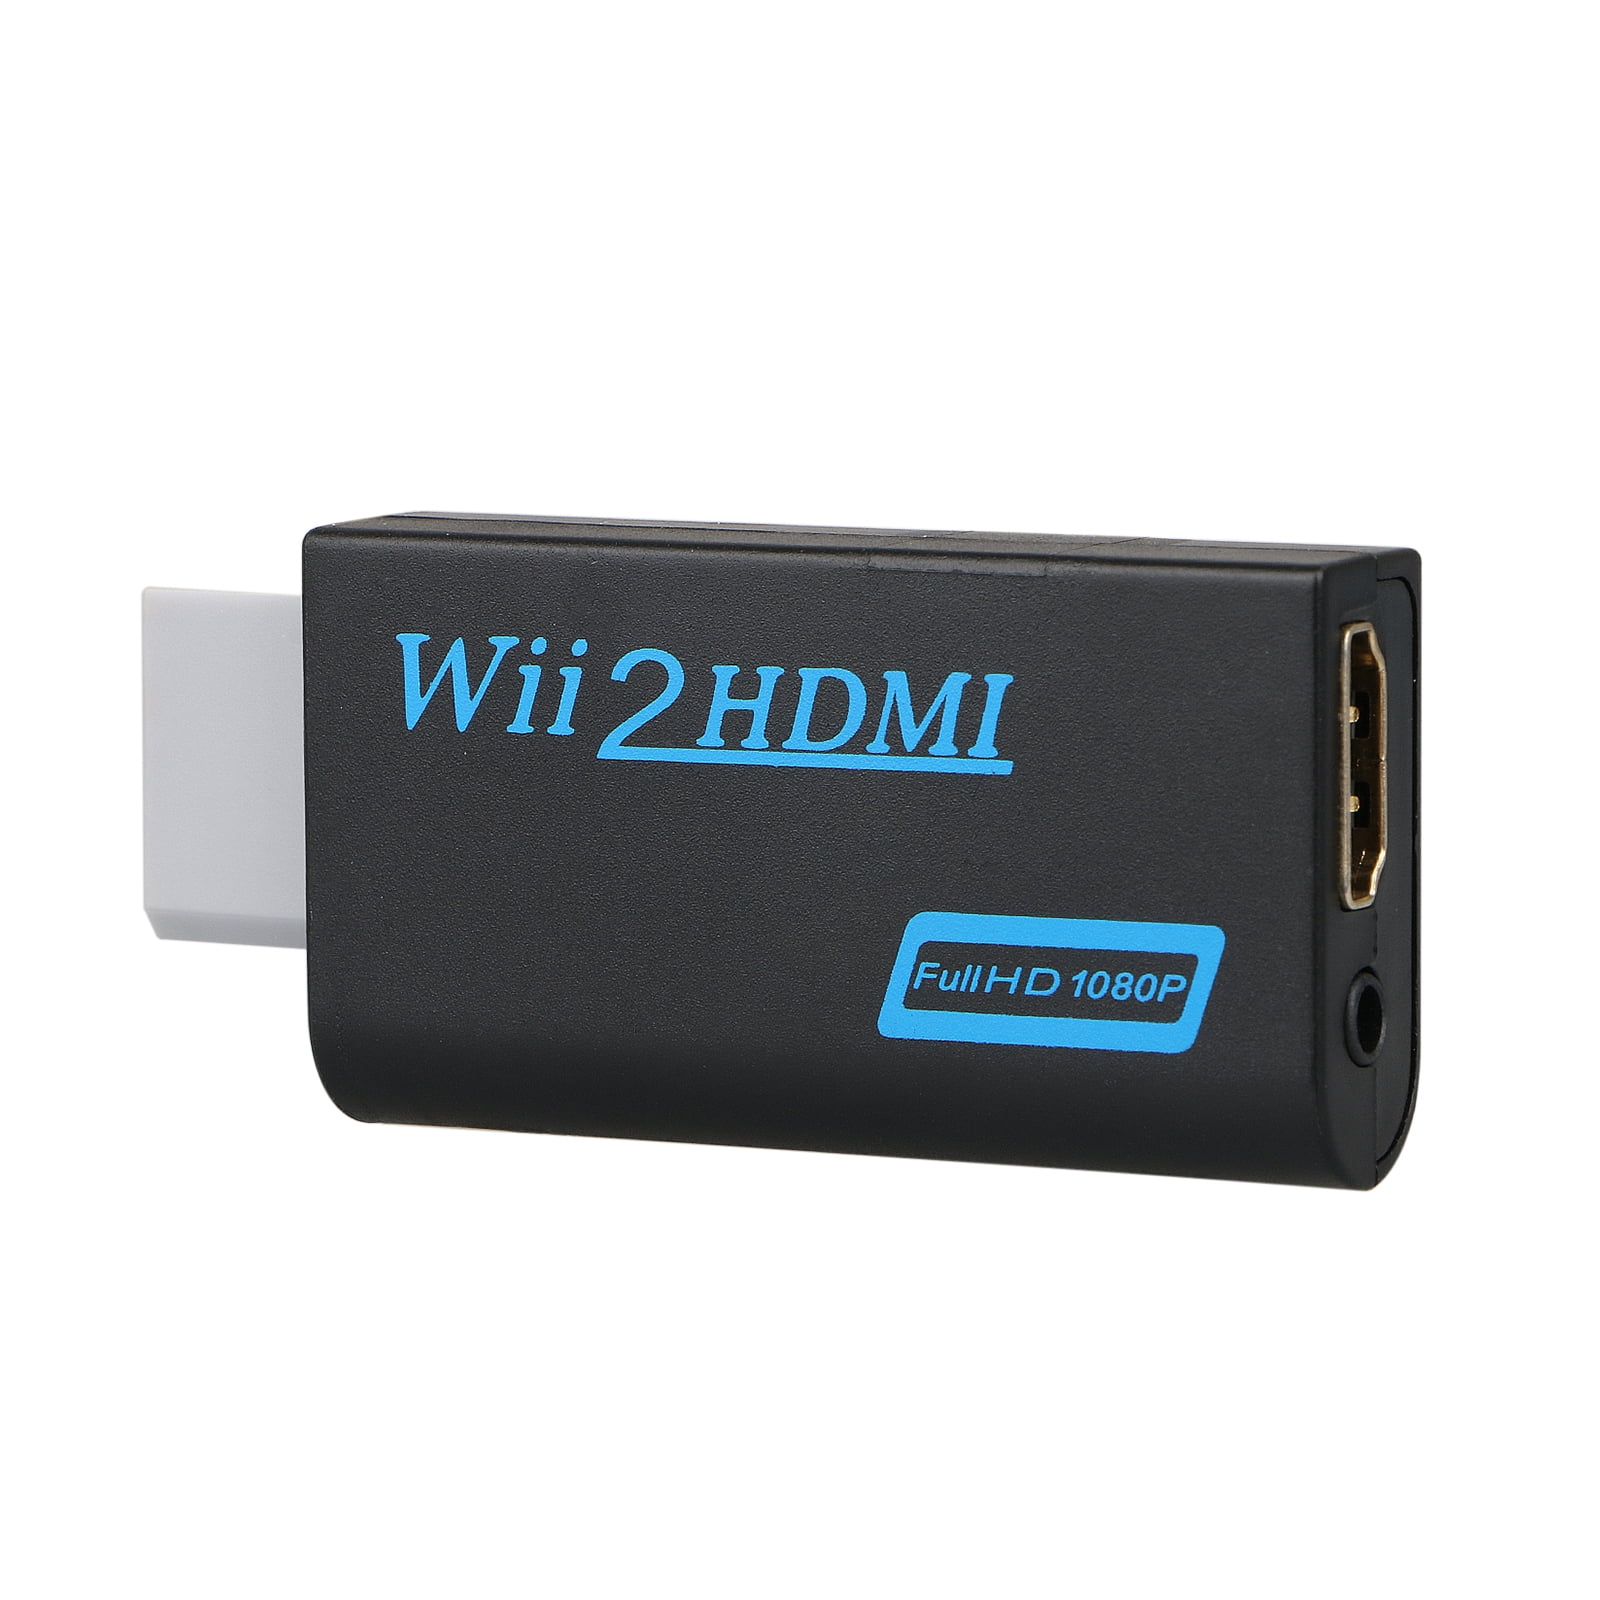 wii hdmi adapter